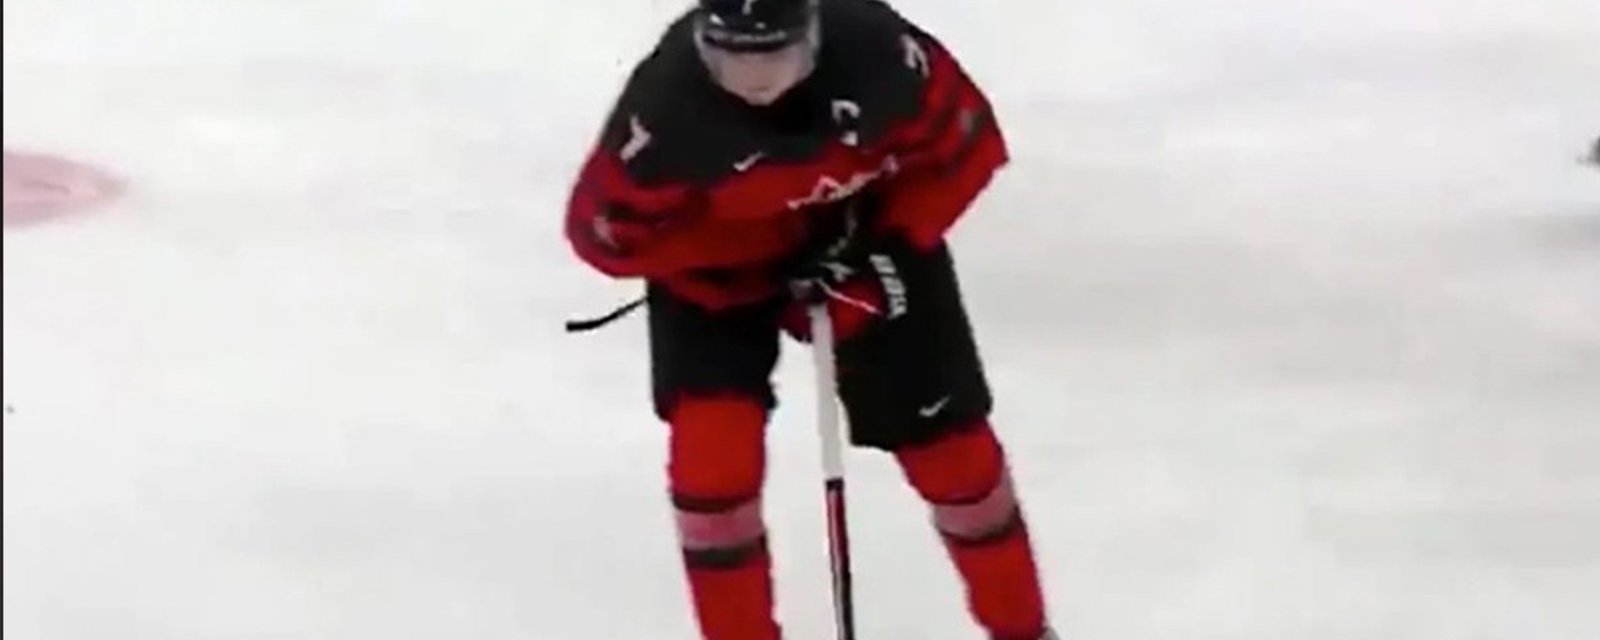 Team Canada captain Kirby Dach is out for entire World Juniors after he appears to break his arm